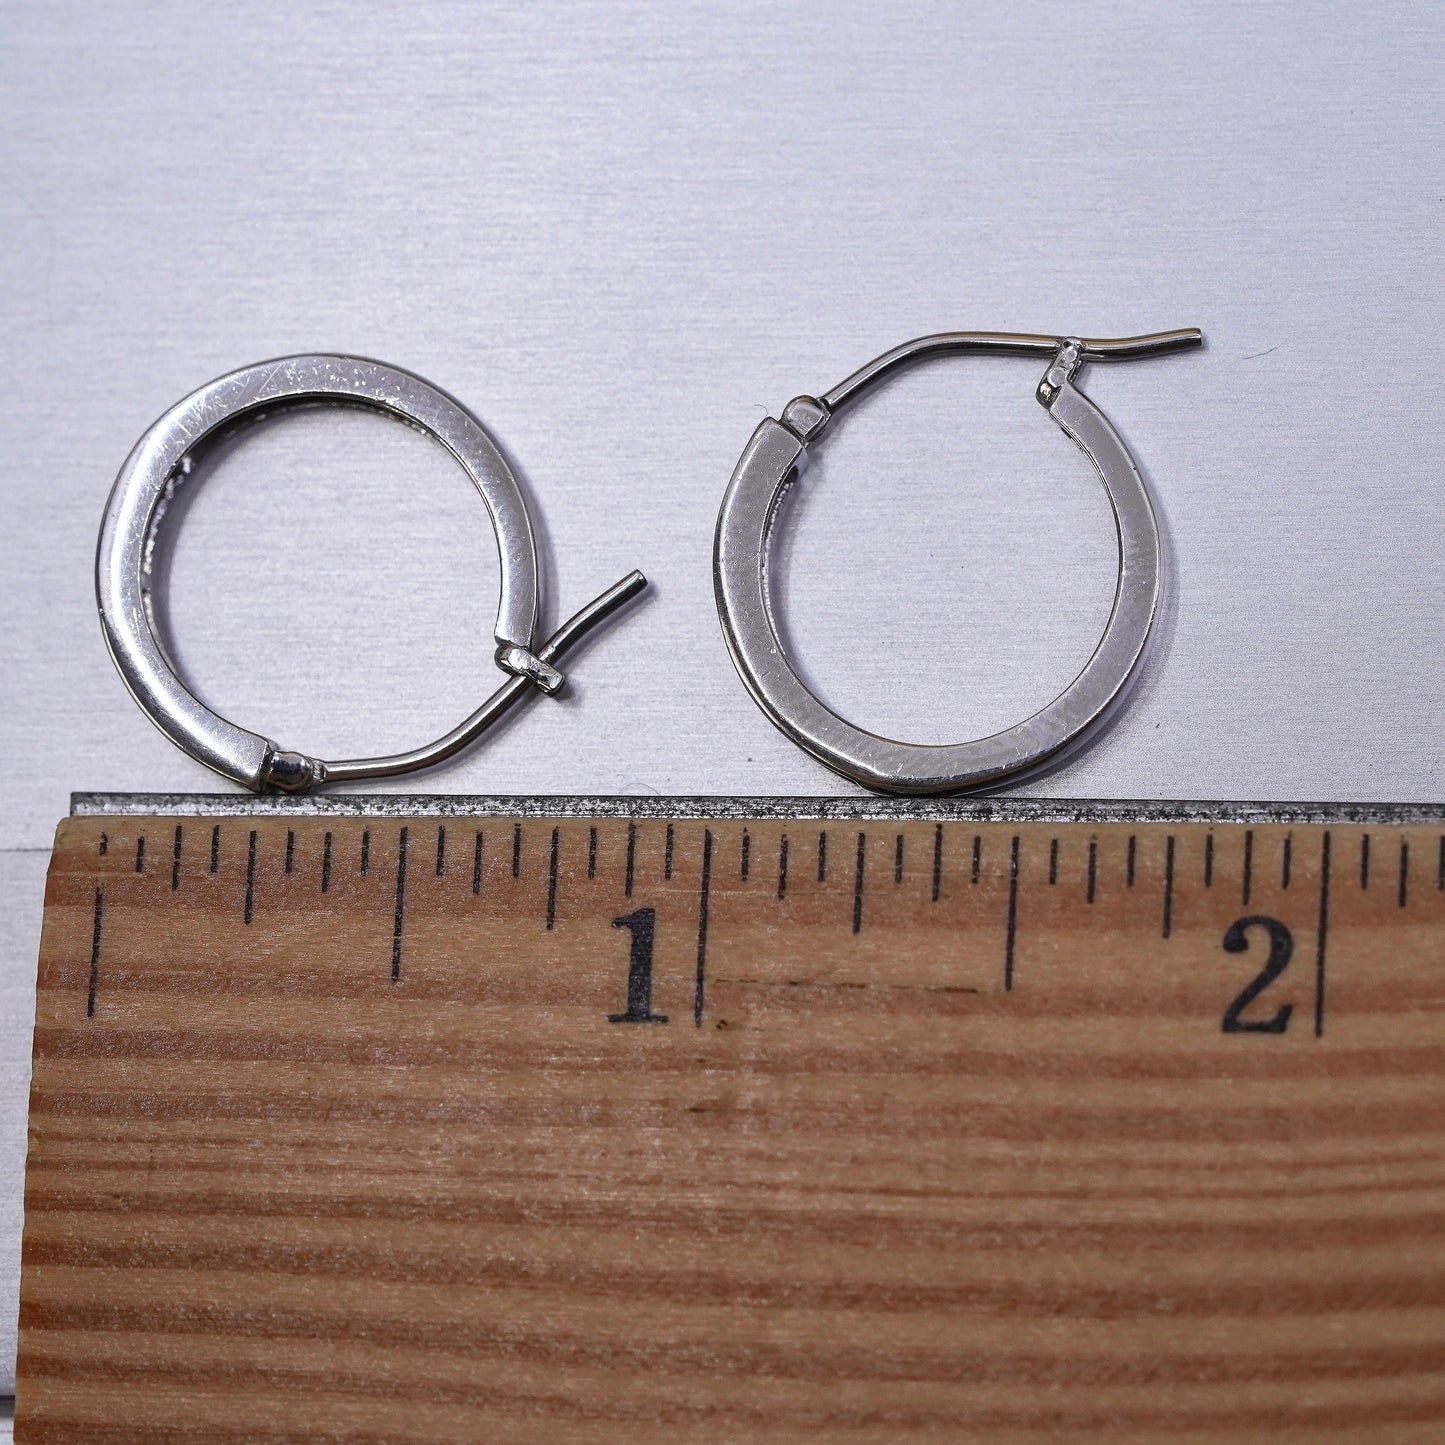 0.5", vintage Sterling silver earrings, 925 huggie hoops with sapphire and cz